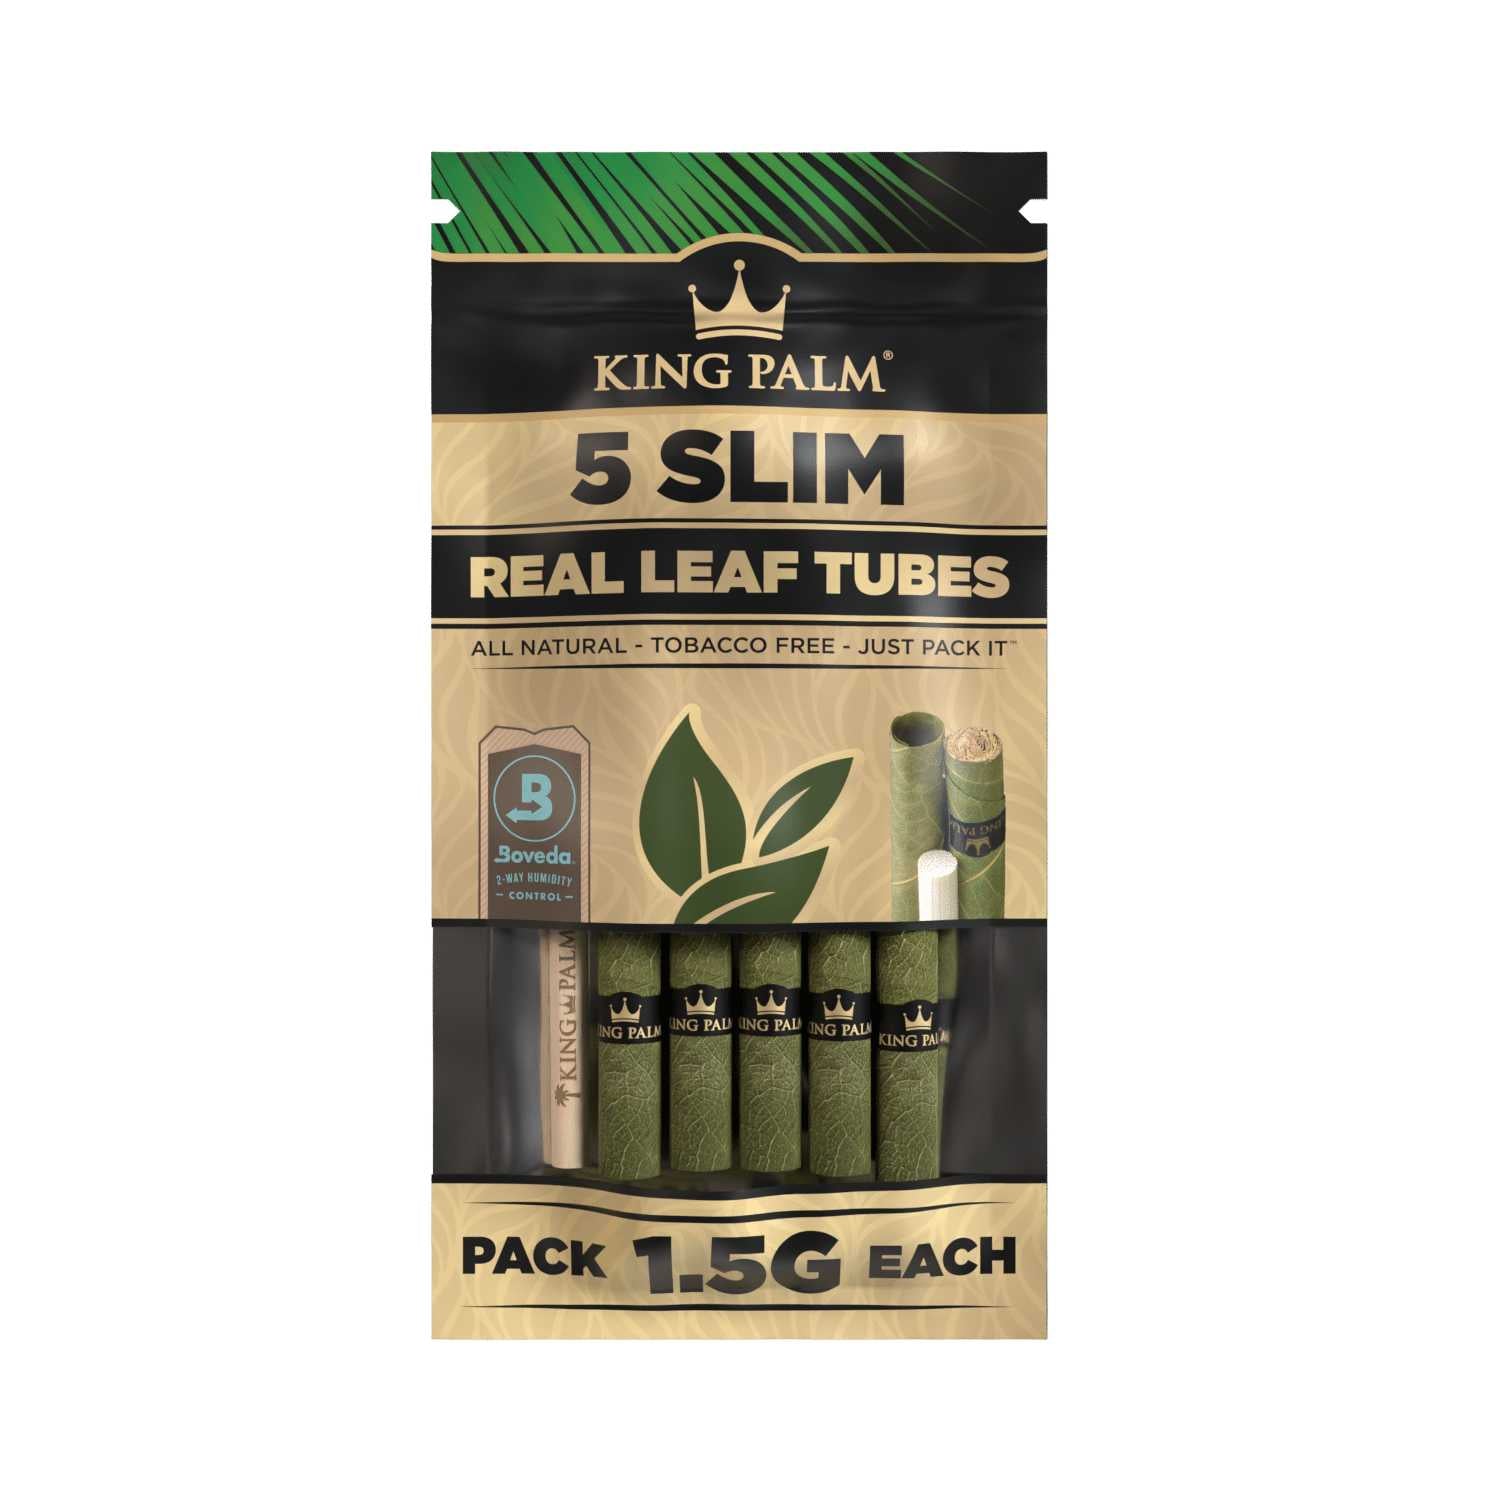 King Palm Natural Cones - Slim (5) - - Pre-rolls - King Palm - Cali Tobacconist